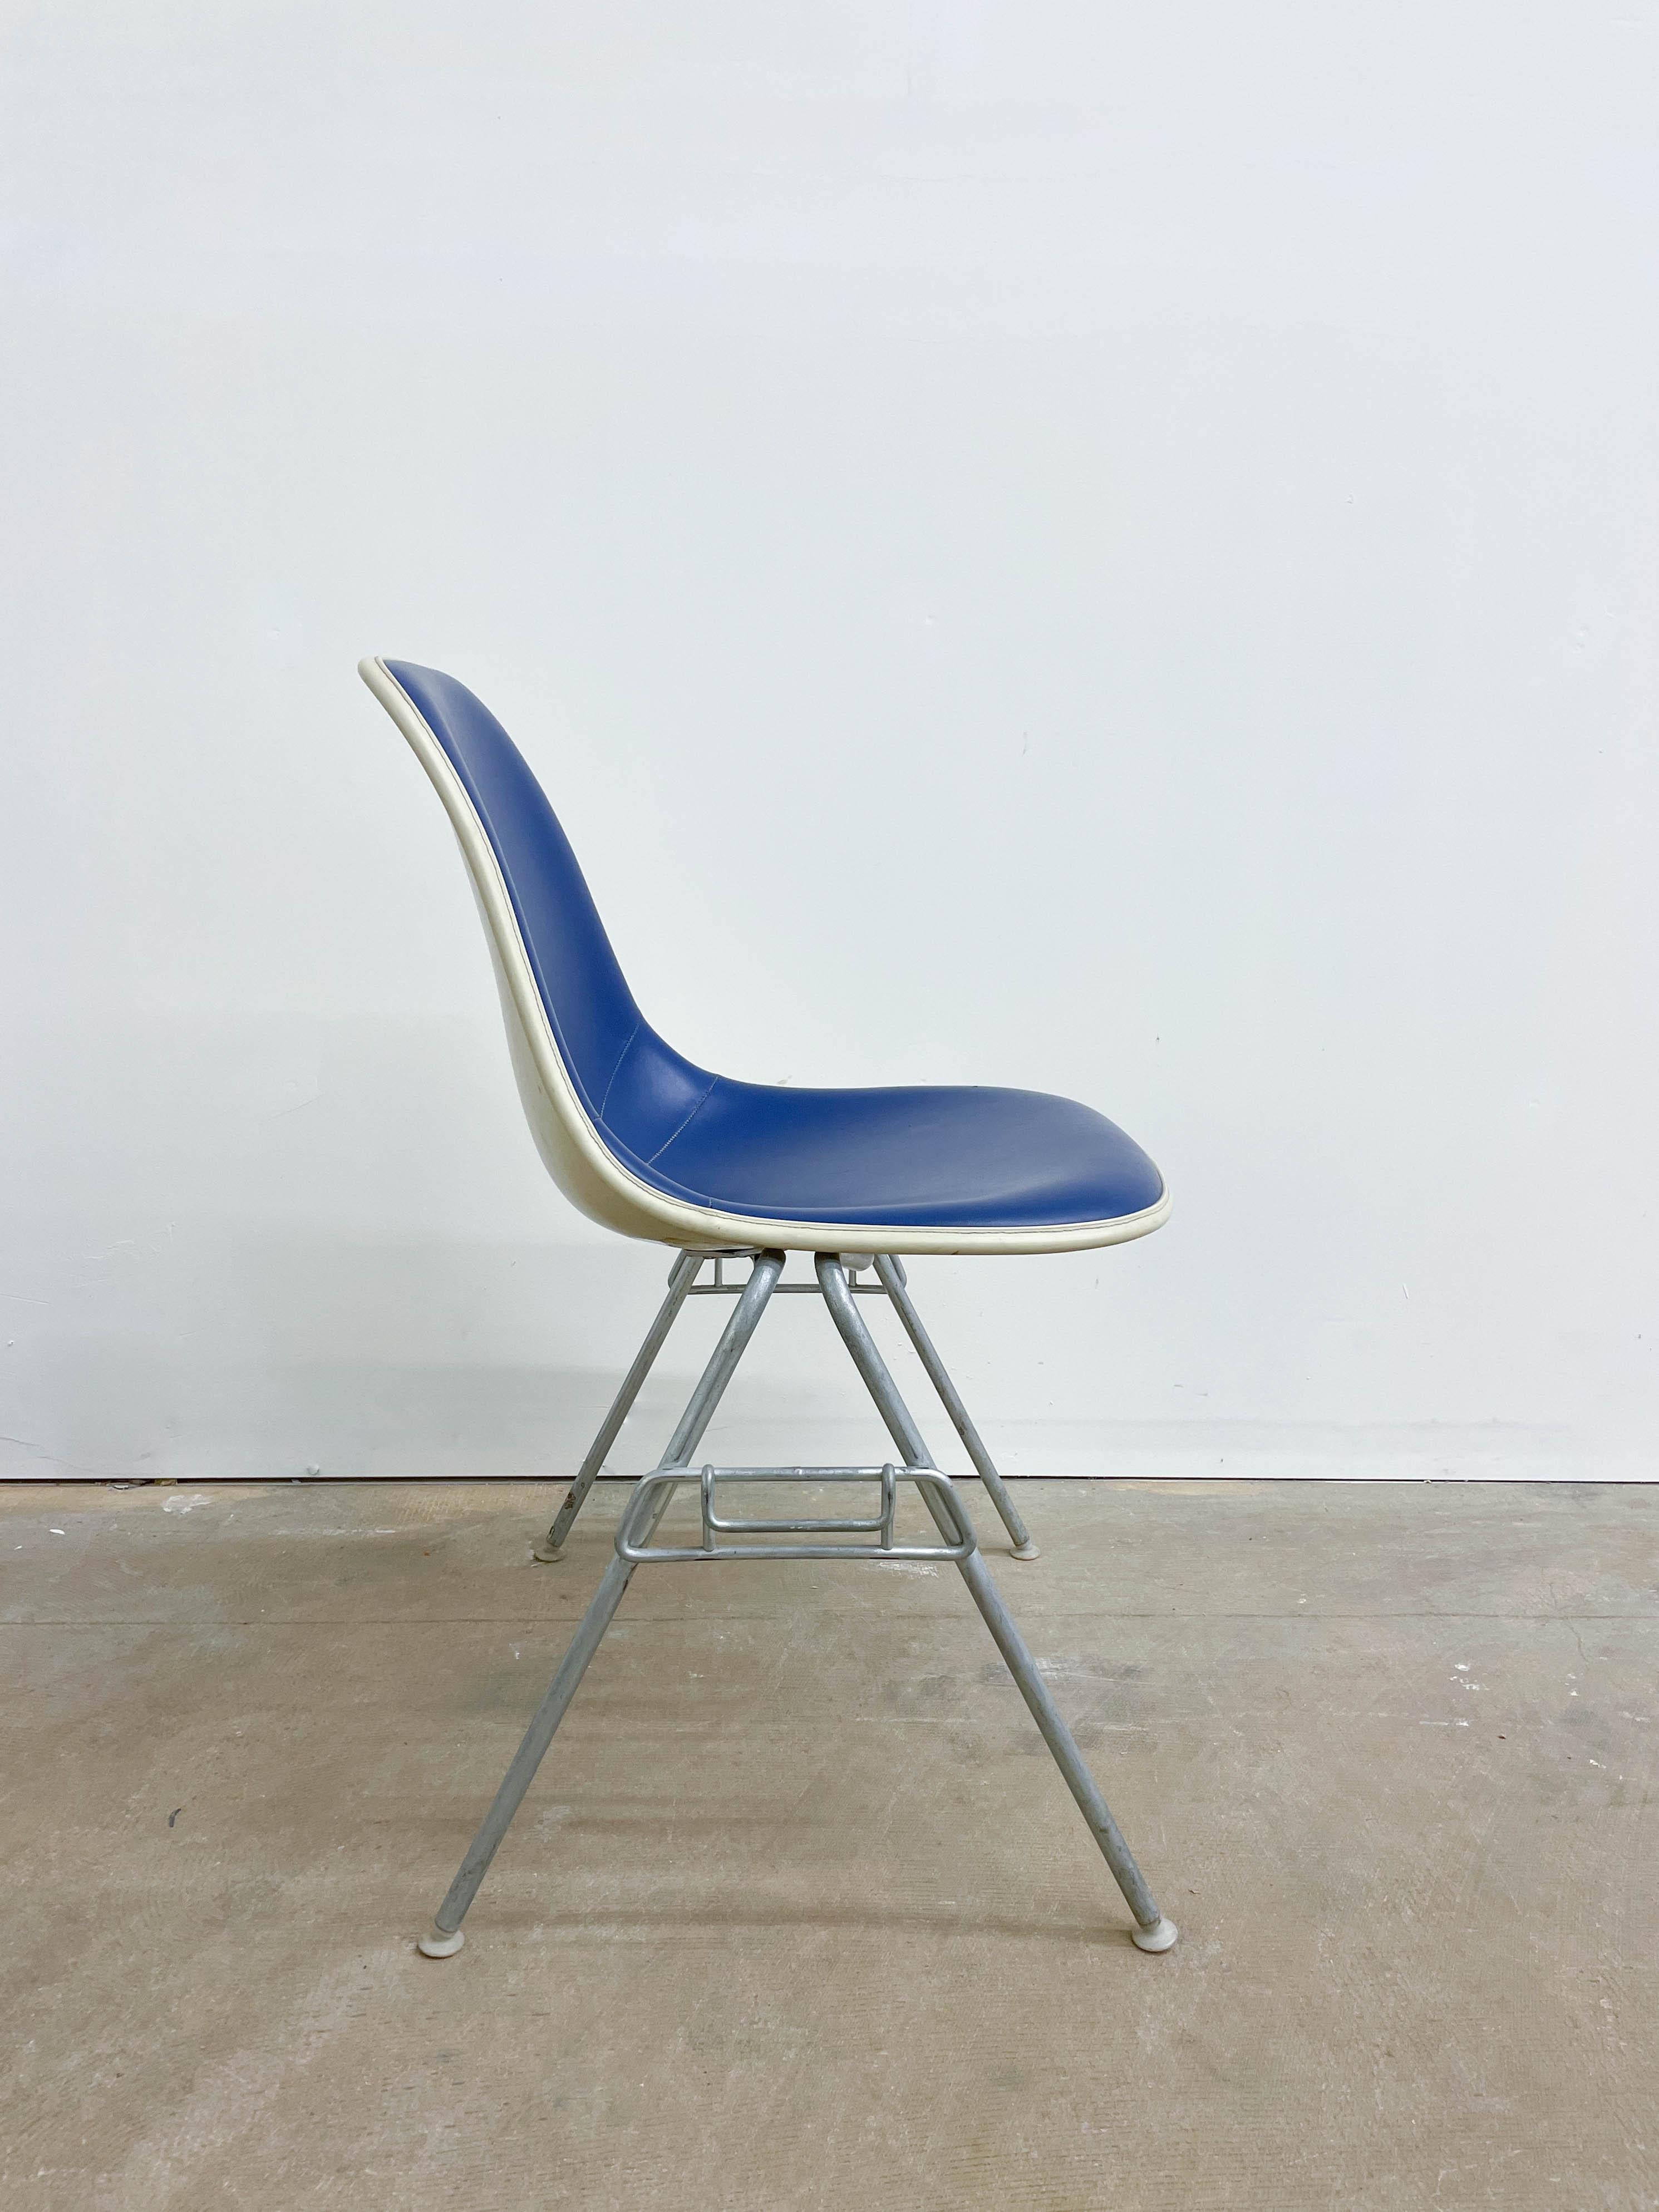 If you are searching for an iconic example of mid-century modern design, look no further! This fiberglass shell chair was designed by Charles and Ray Eames, the famous design duo. The fiberglass shell sits on a on stacking base. Made by Herman